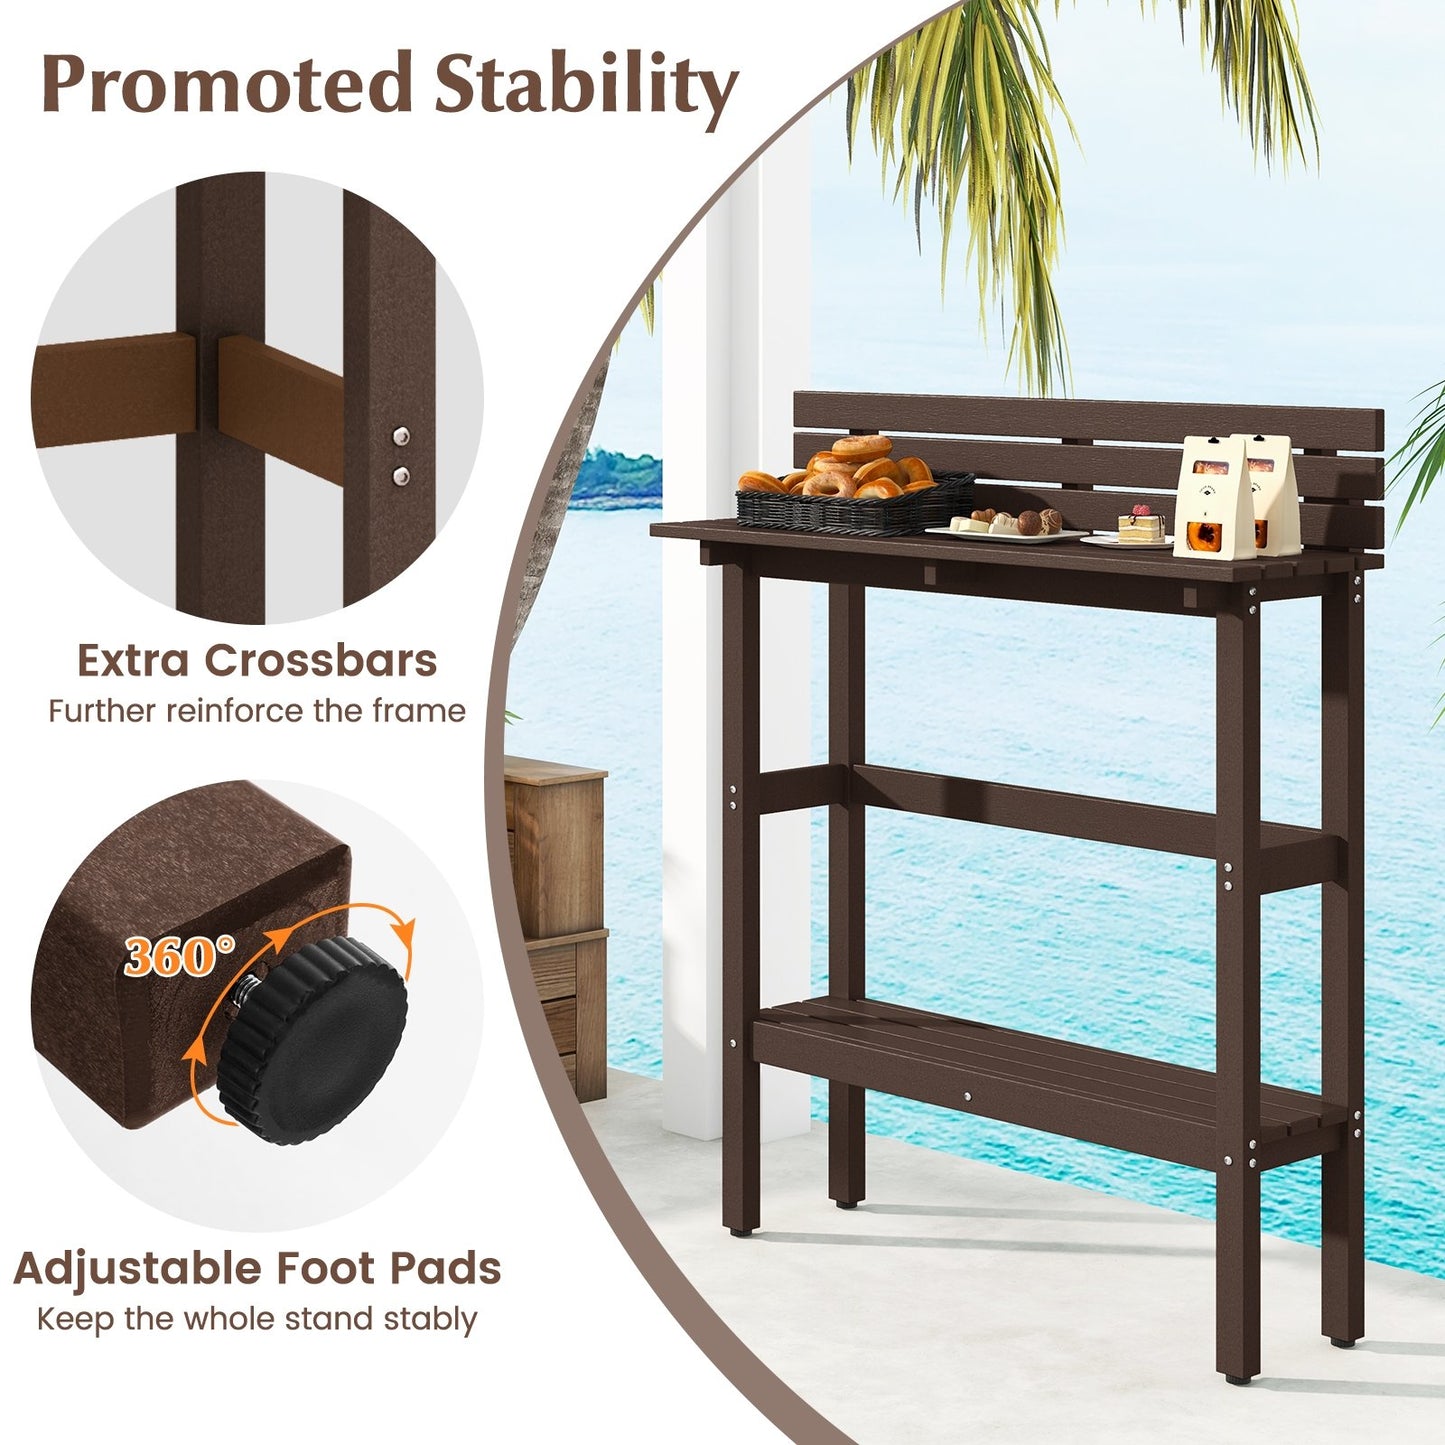 48" Patio Pub Height Table with Storage Shelf and Adjustable Foot Pads, Brown